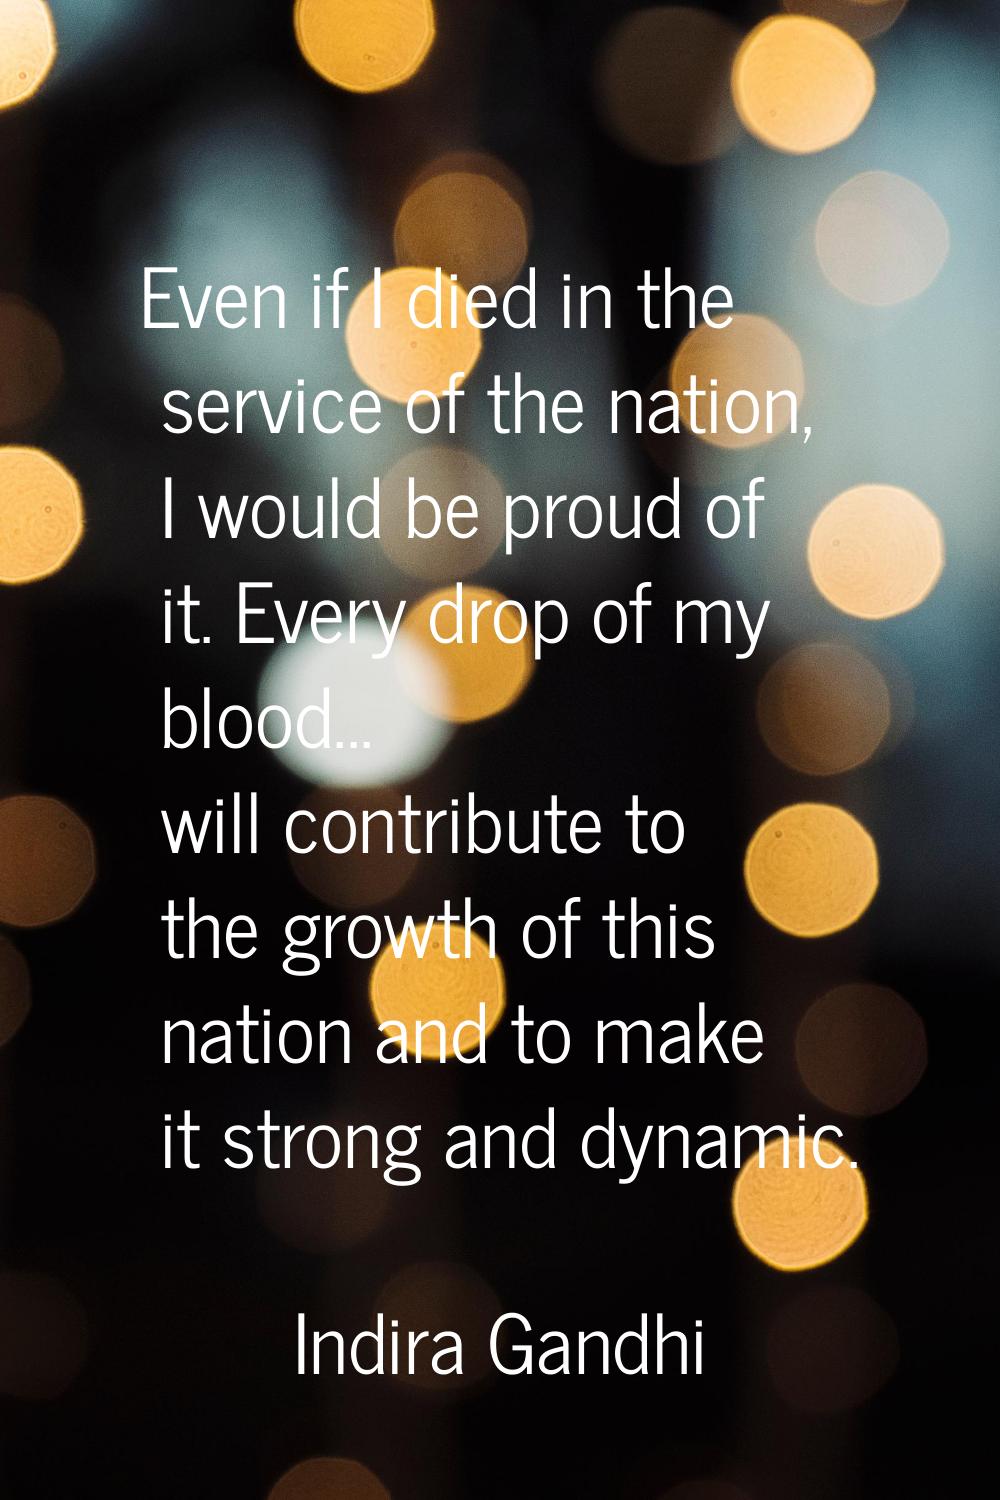 Even if I died in the service of the nation, I would be proud of it. Every drop of my blood... will